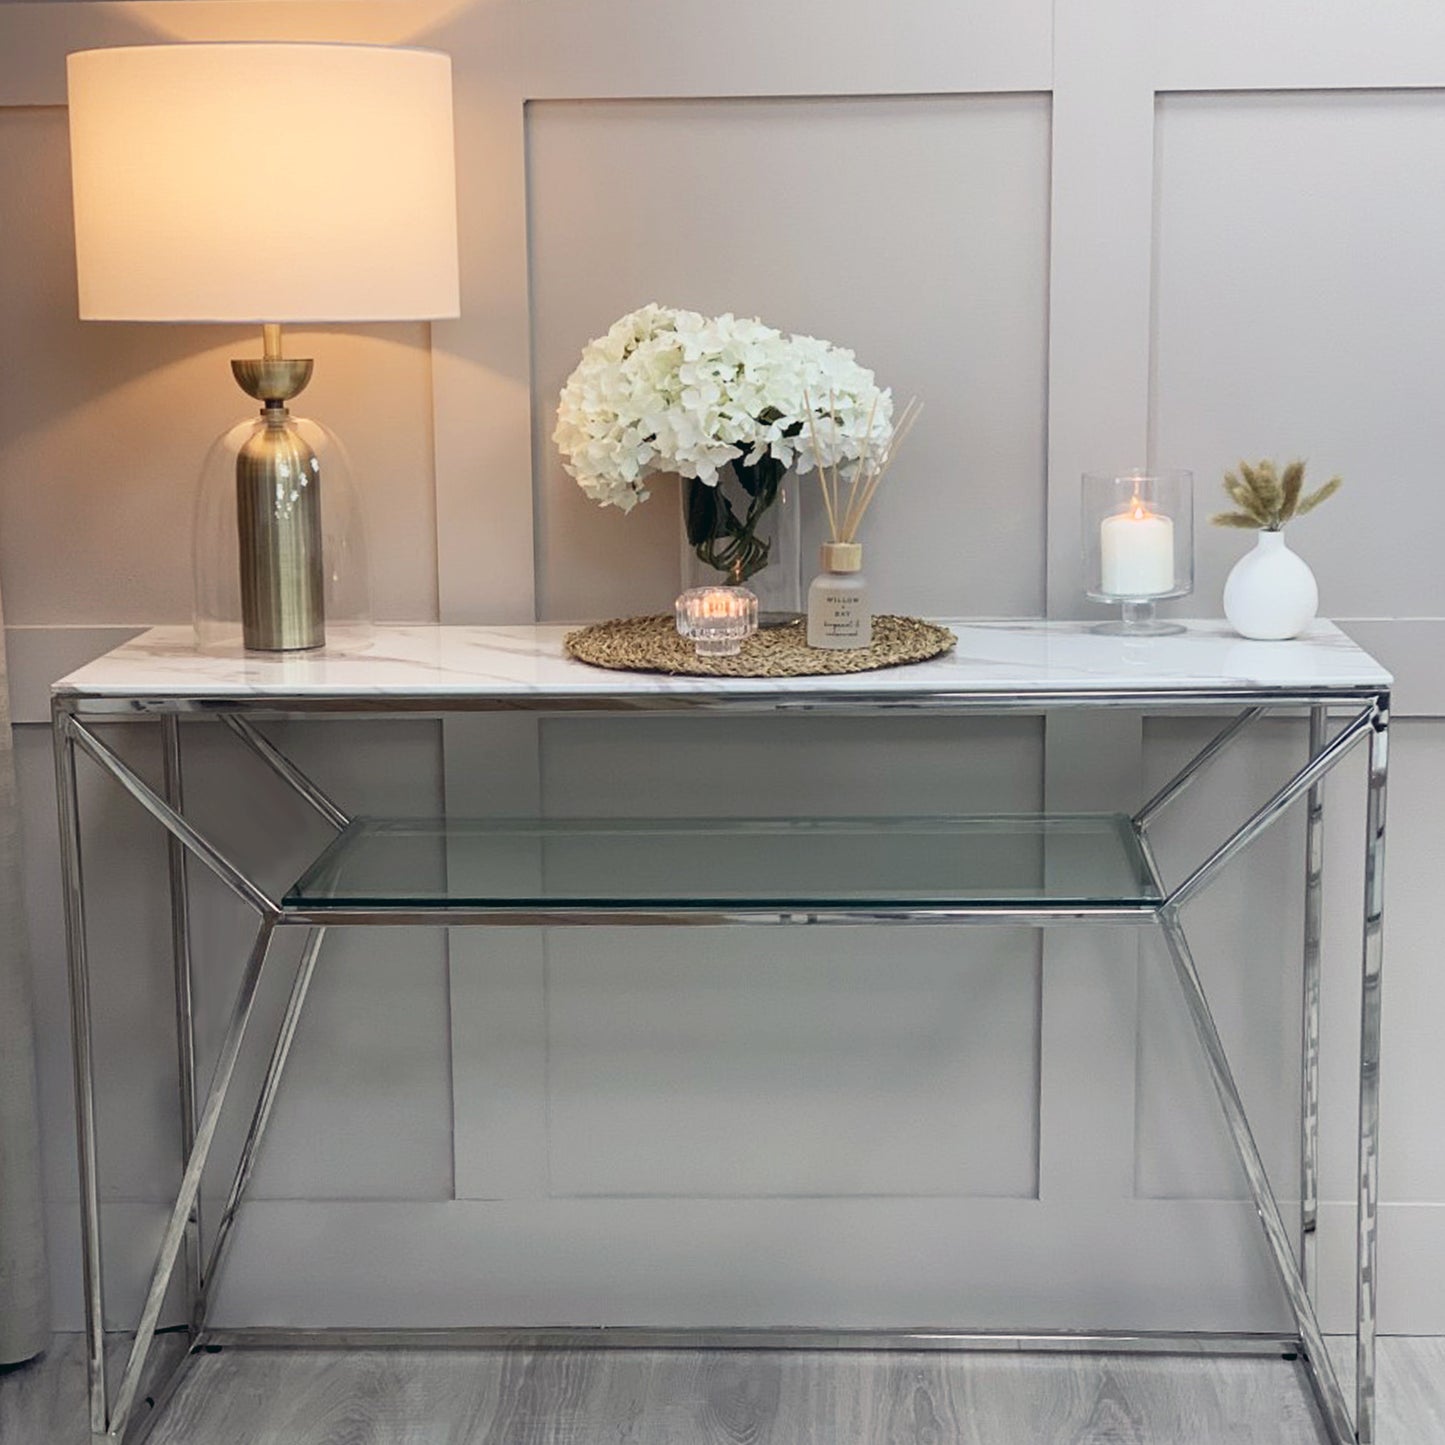 Ava White Marble Effect Console Table With Silver Legs